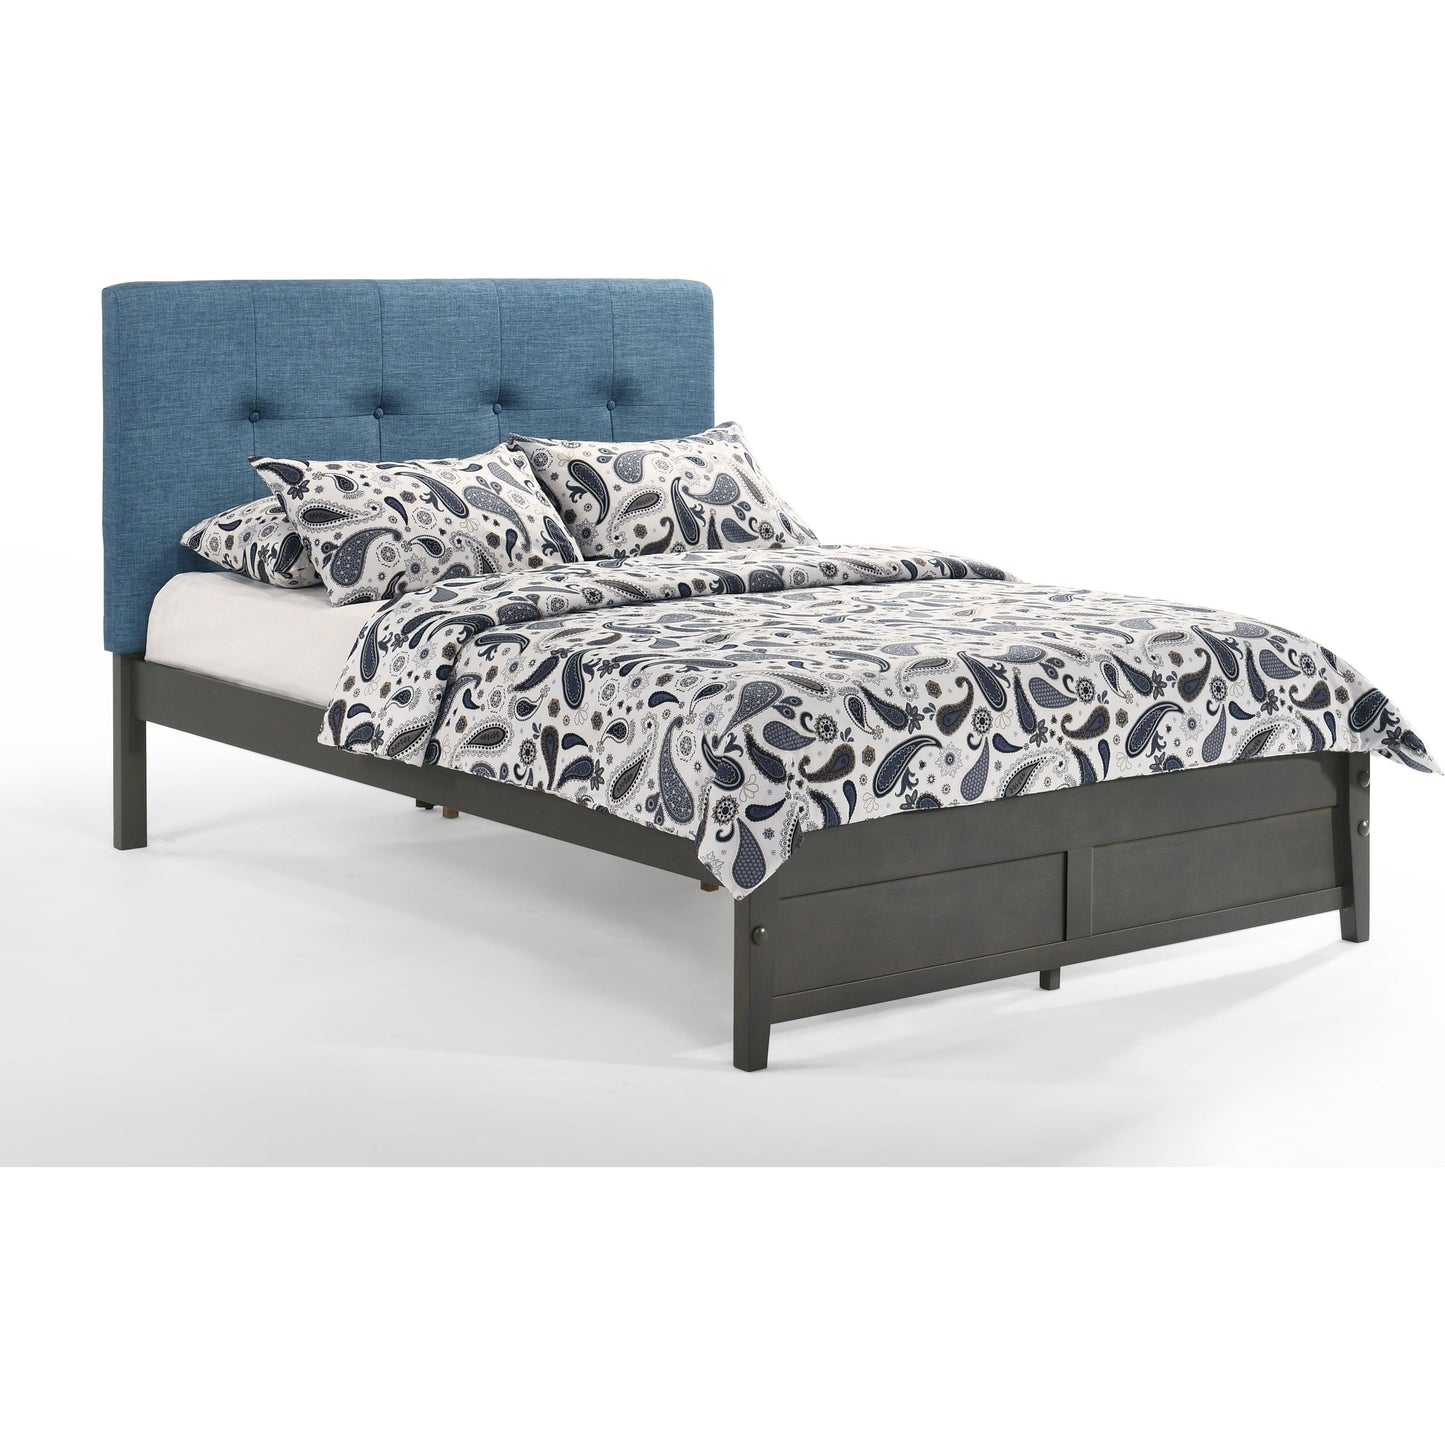 Night and Day Paprika King Bed in Red with Stonewash Finish Frame (K Series) Teal PAP-KH-EKG-TL-STW-COM